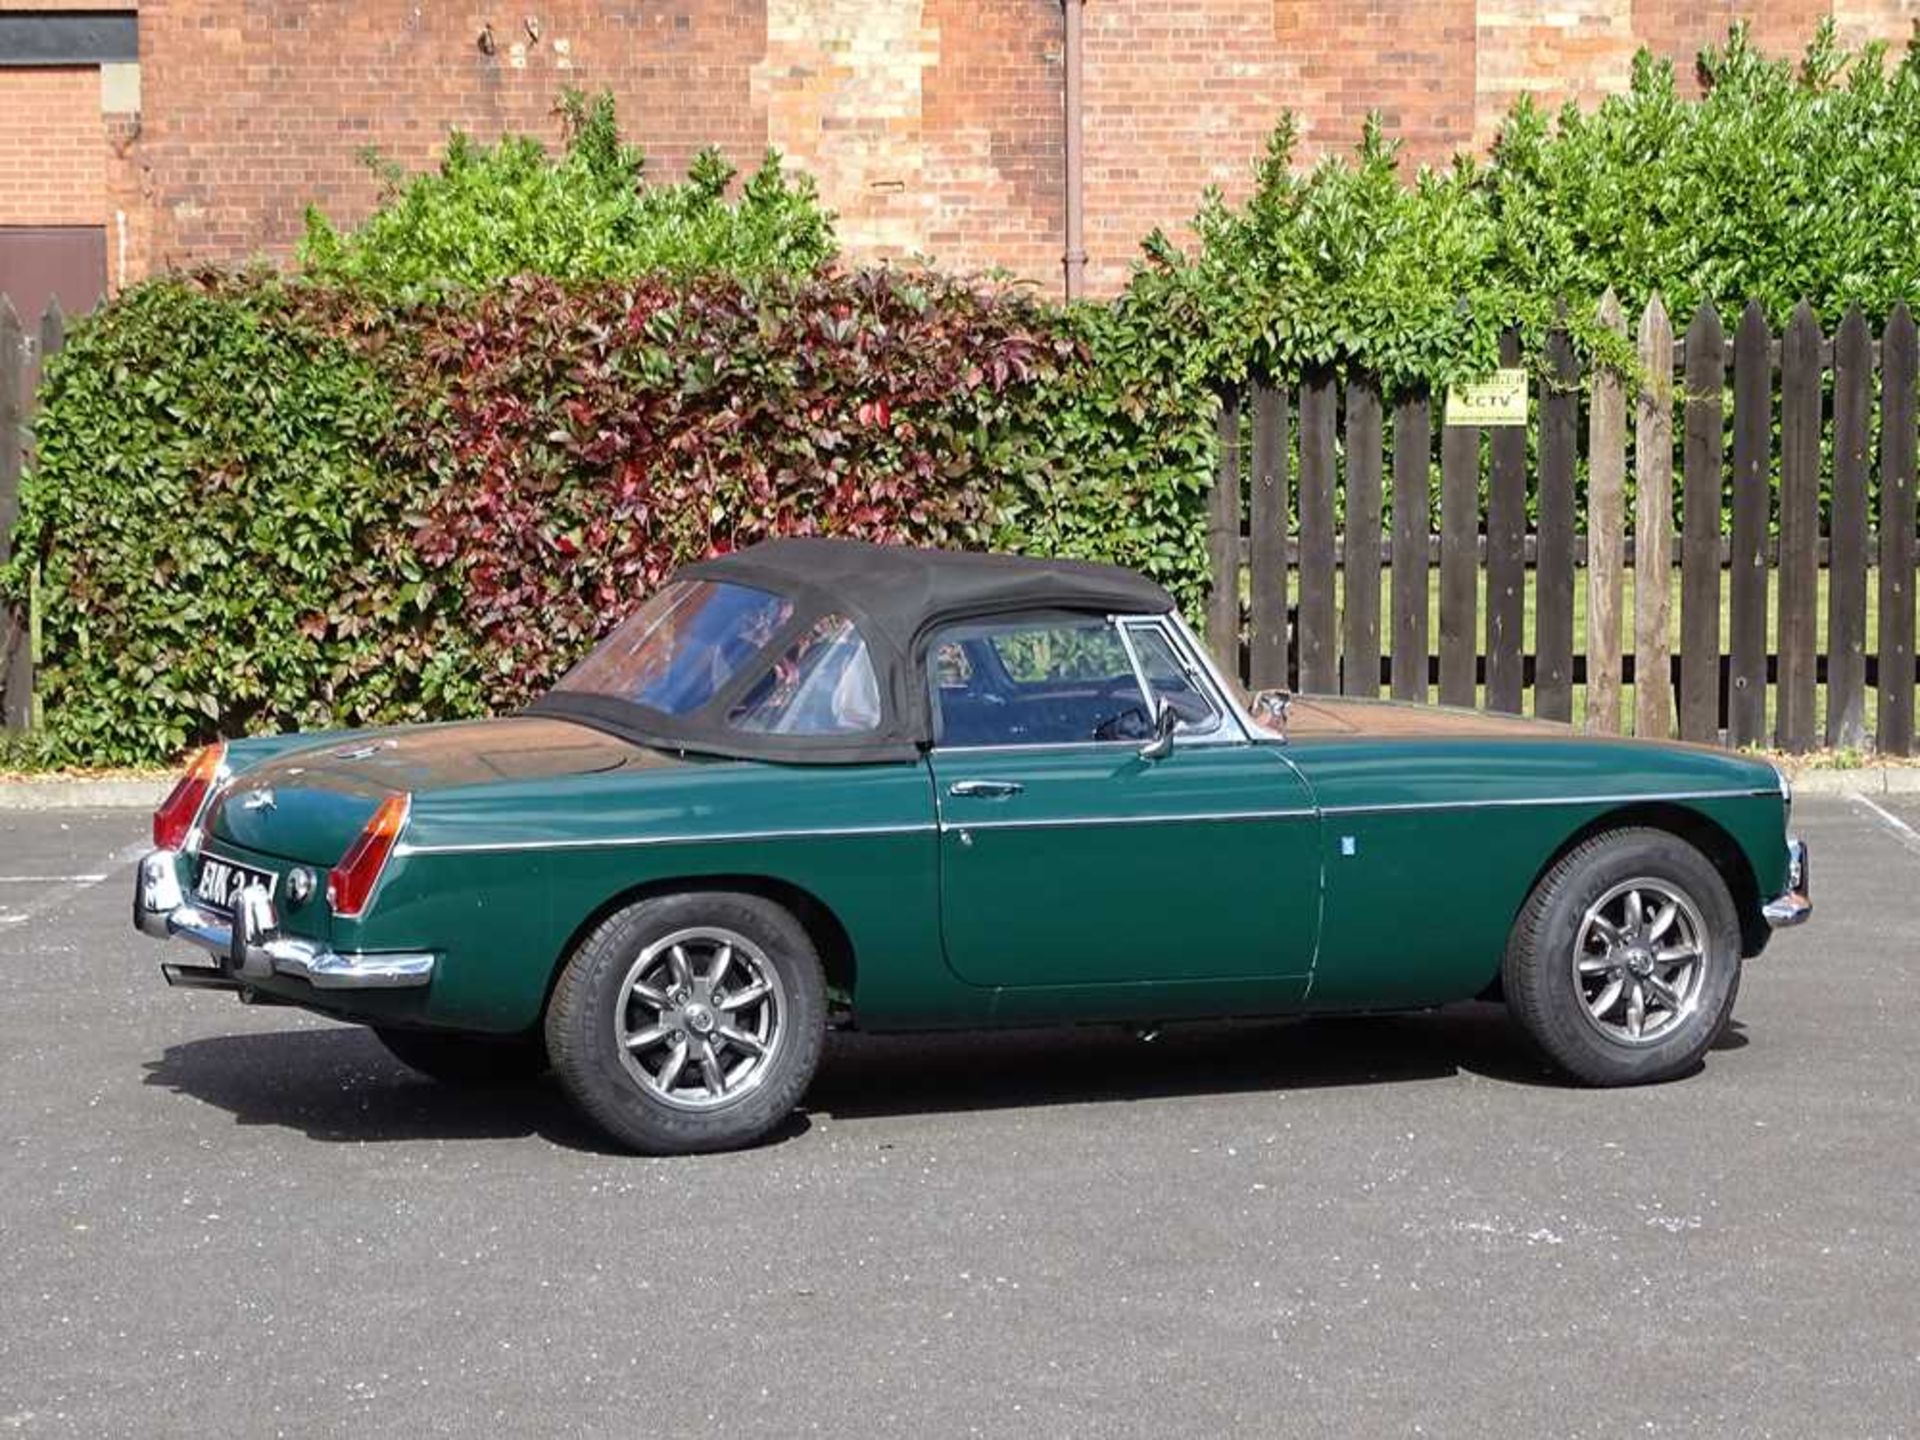 1971 MG B Roadster Restored at a cost of c.£33,000 - Image 2 of 43